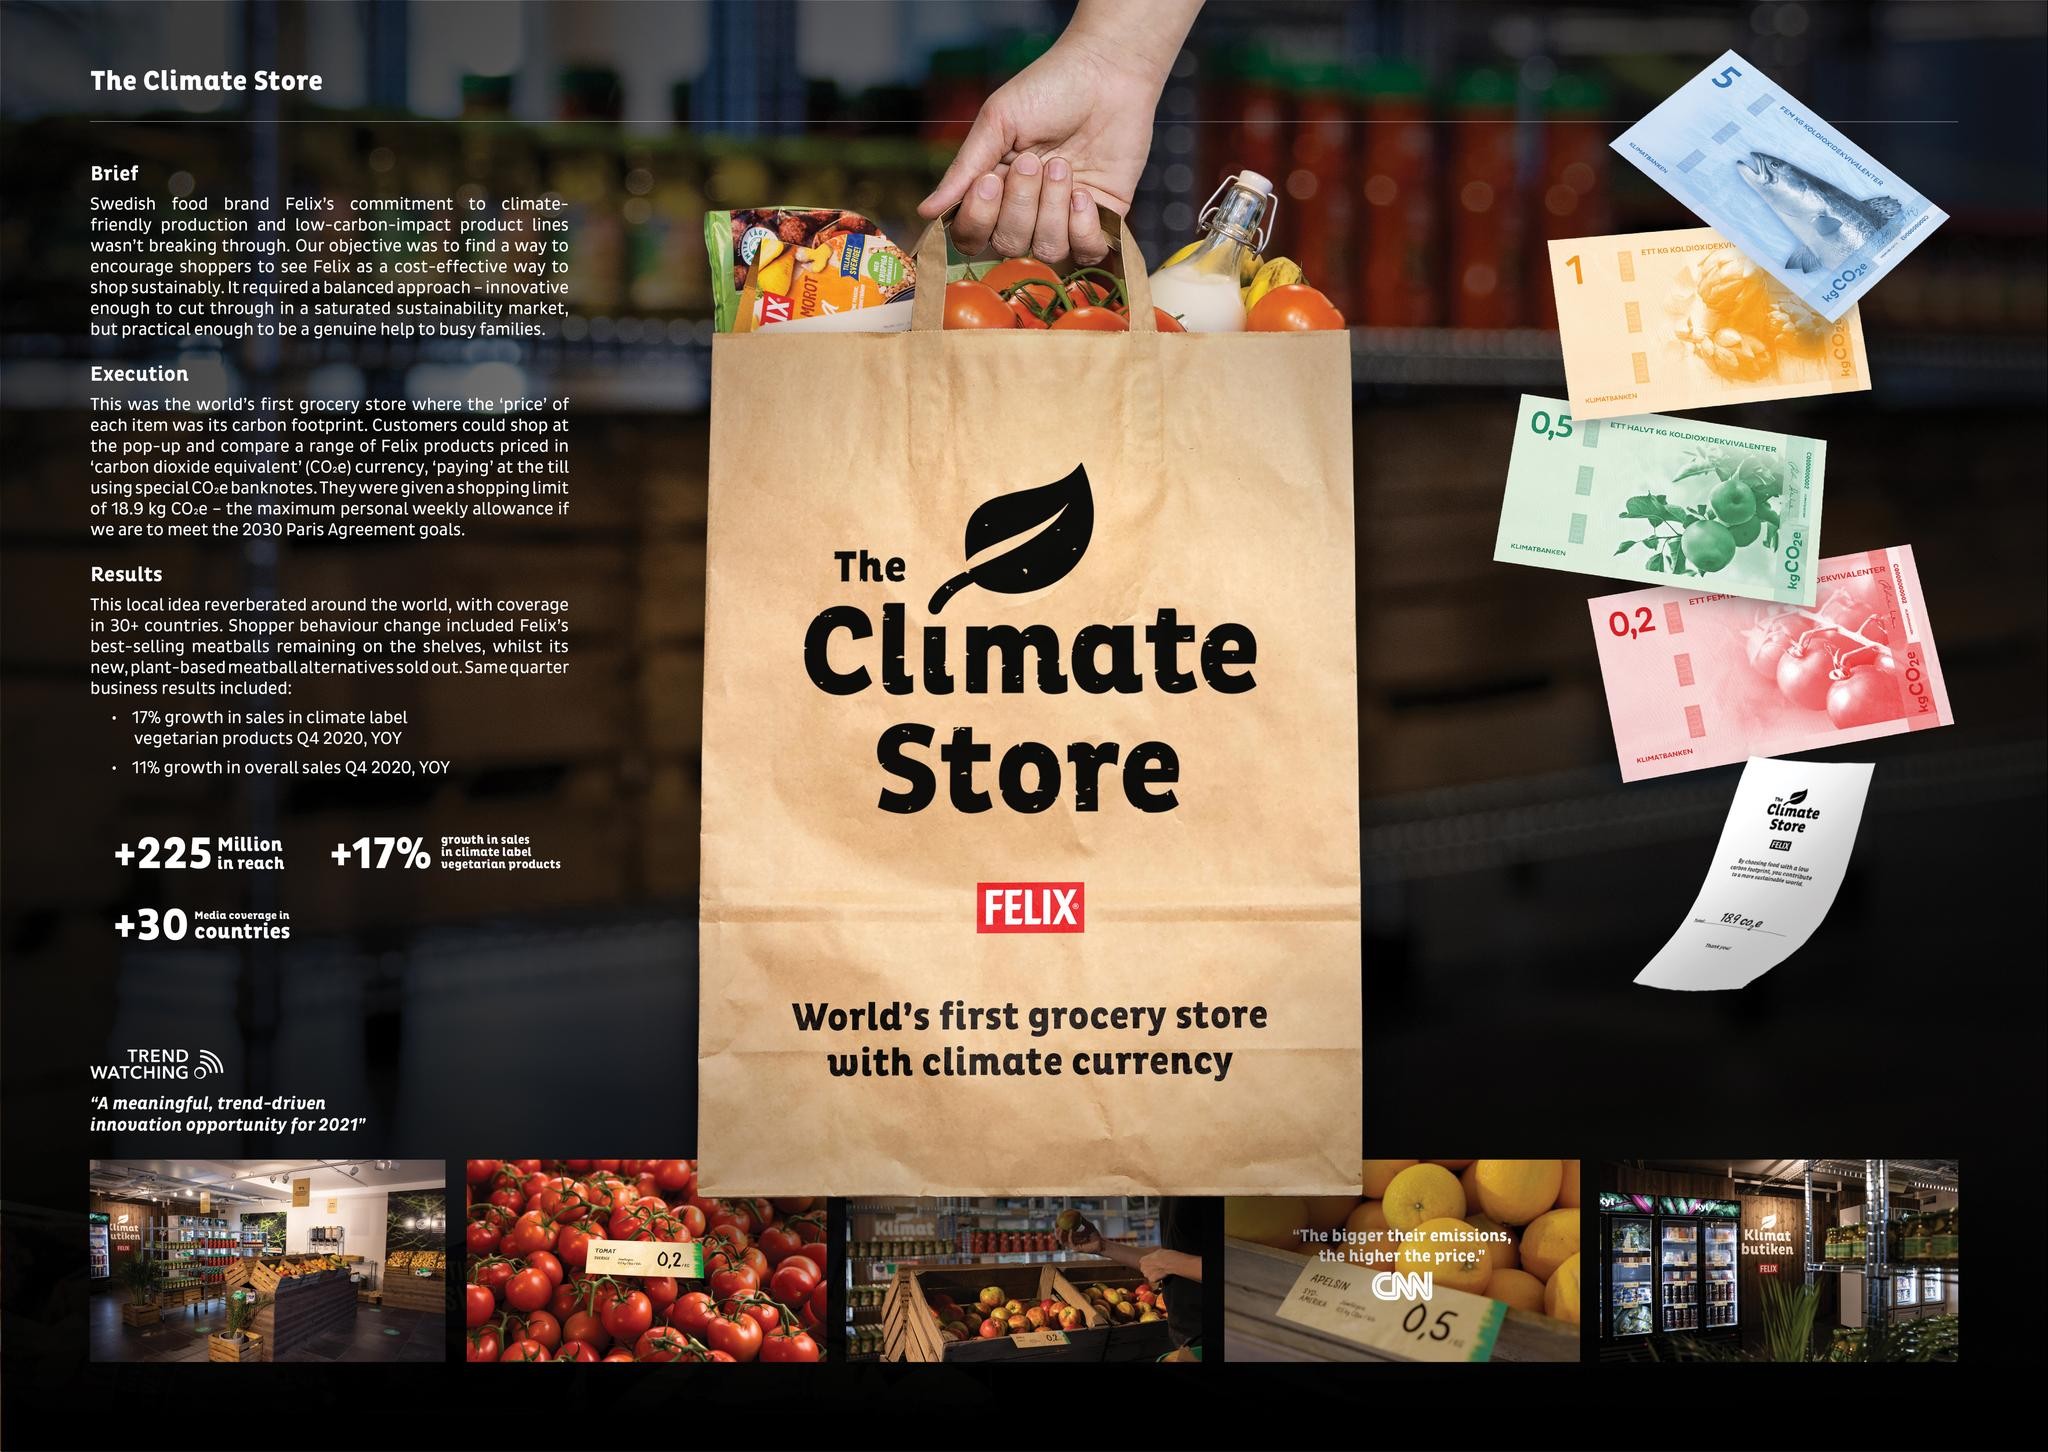 THE CLIMATE STORE